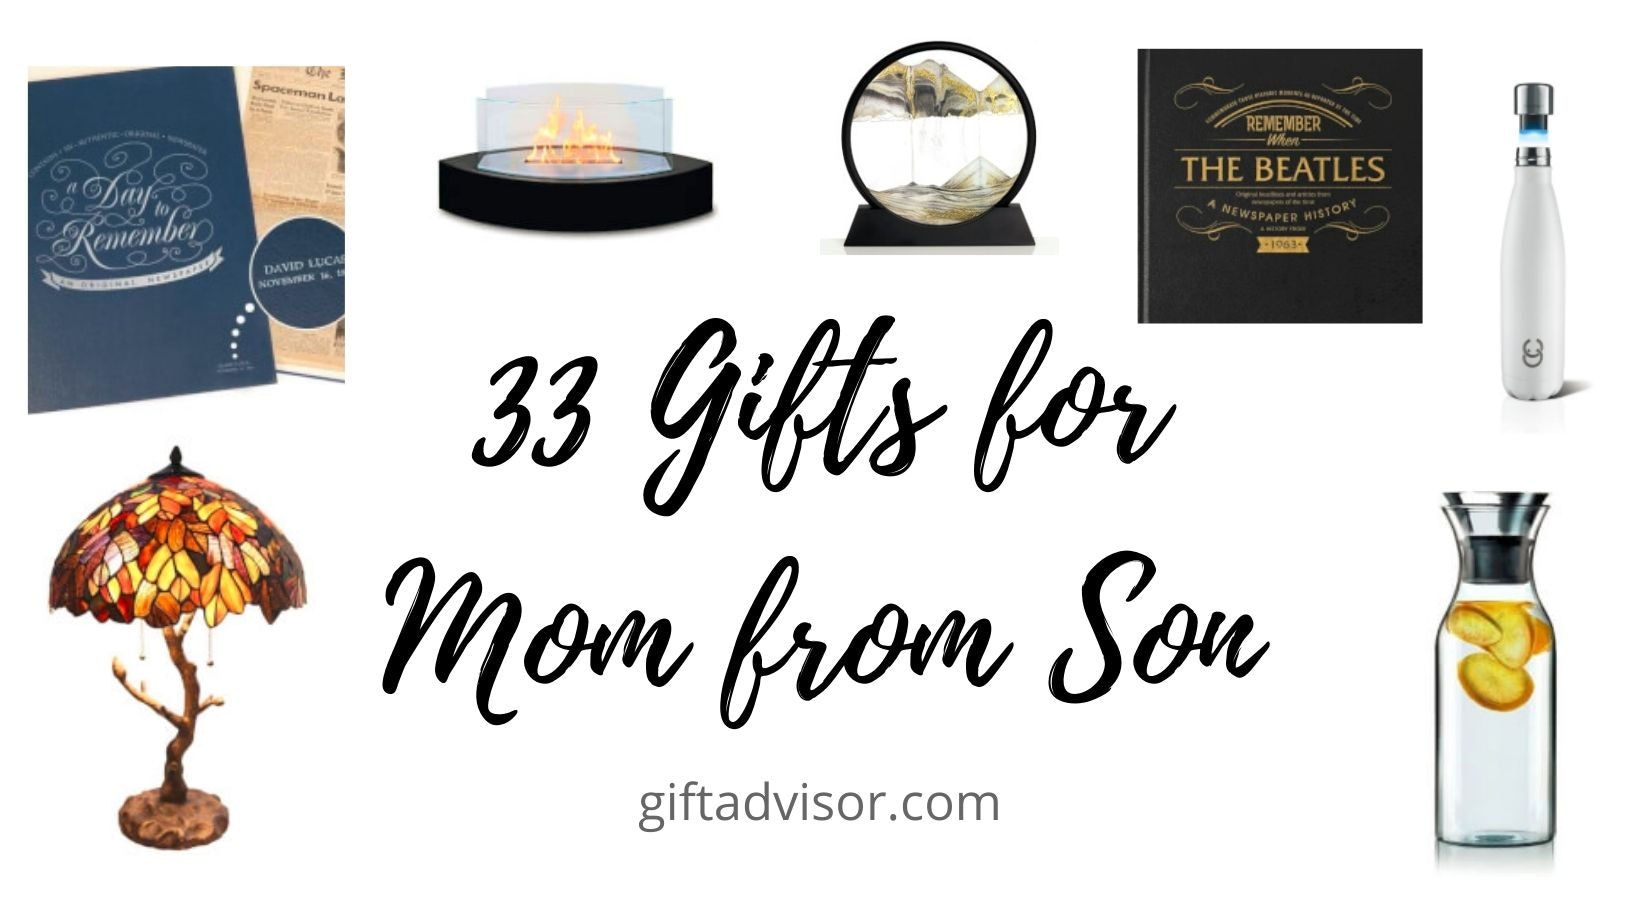 33 Gifts for Your Boyfriend's Mom That She'll Adore